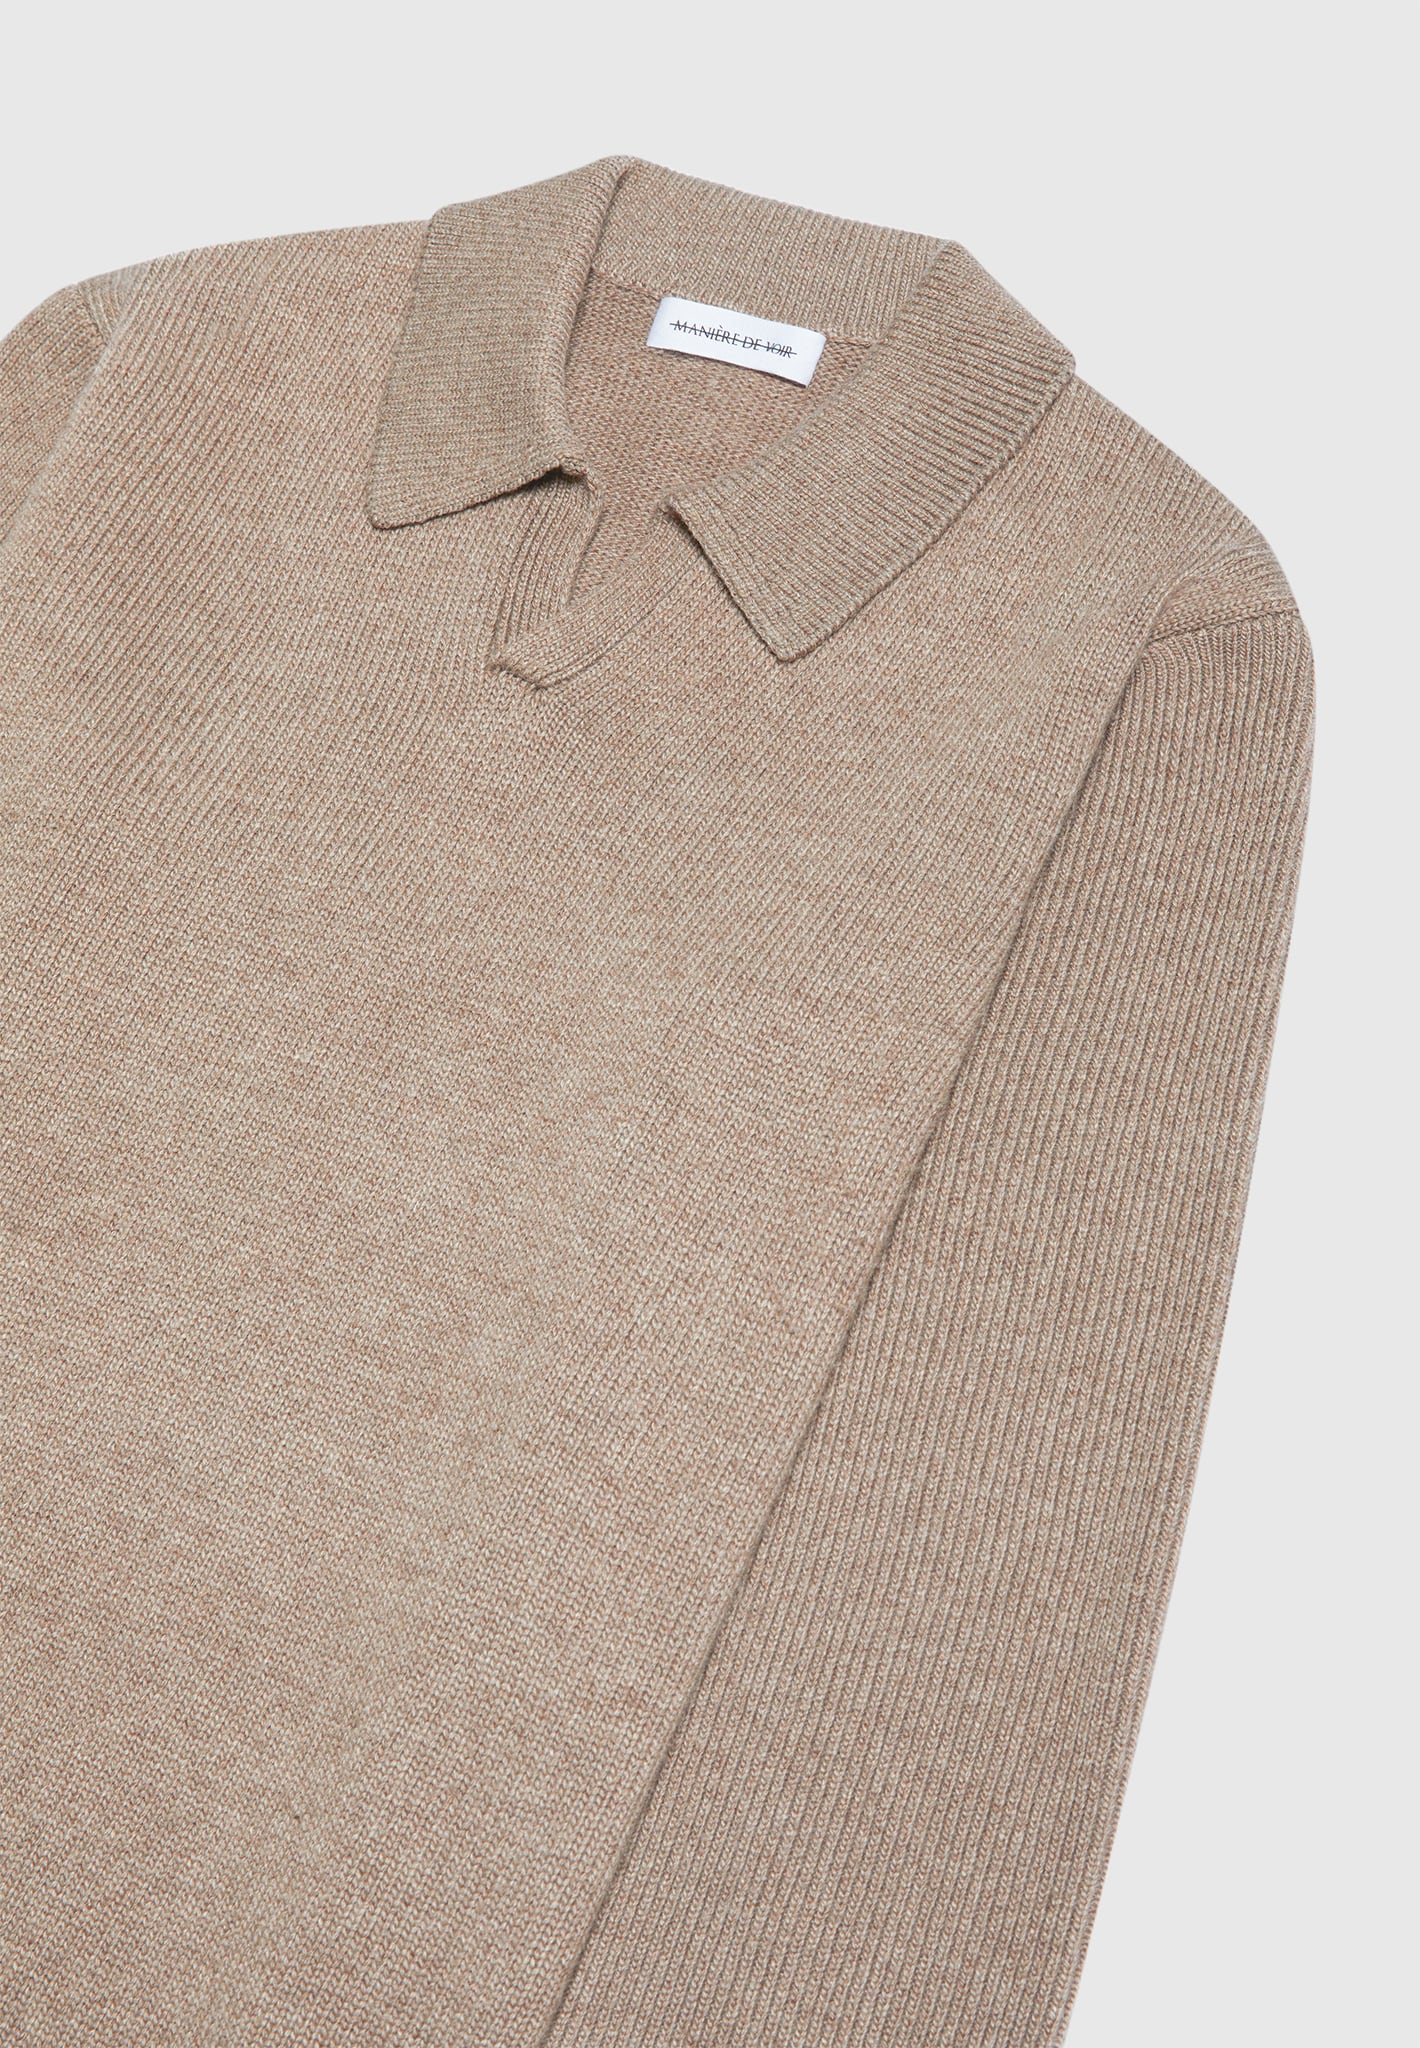 wool-blend-knit-revere-long-sleeve-jumper-taupe